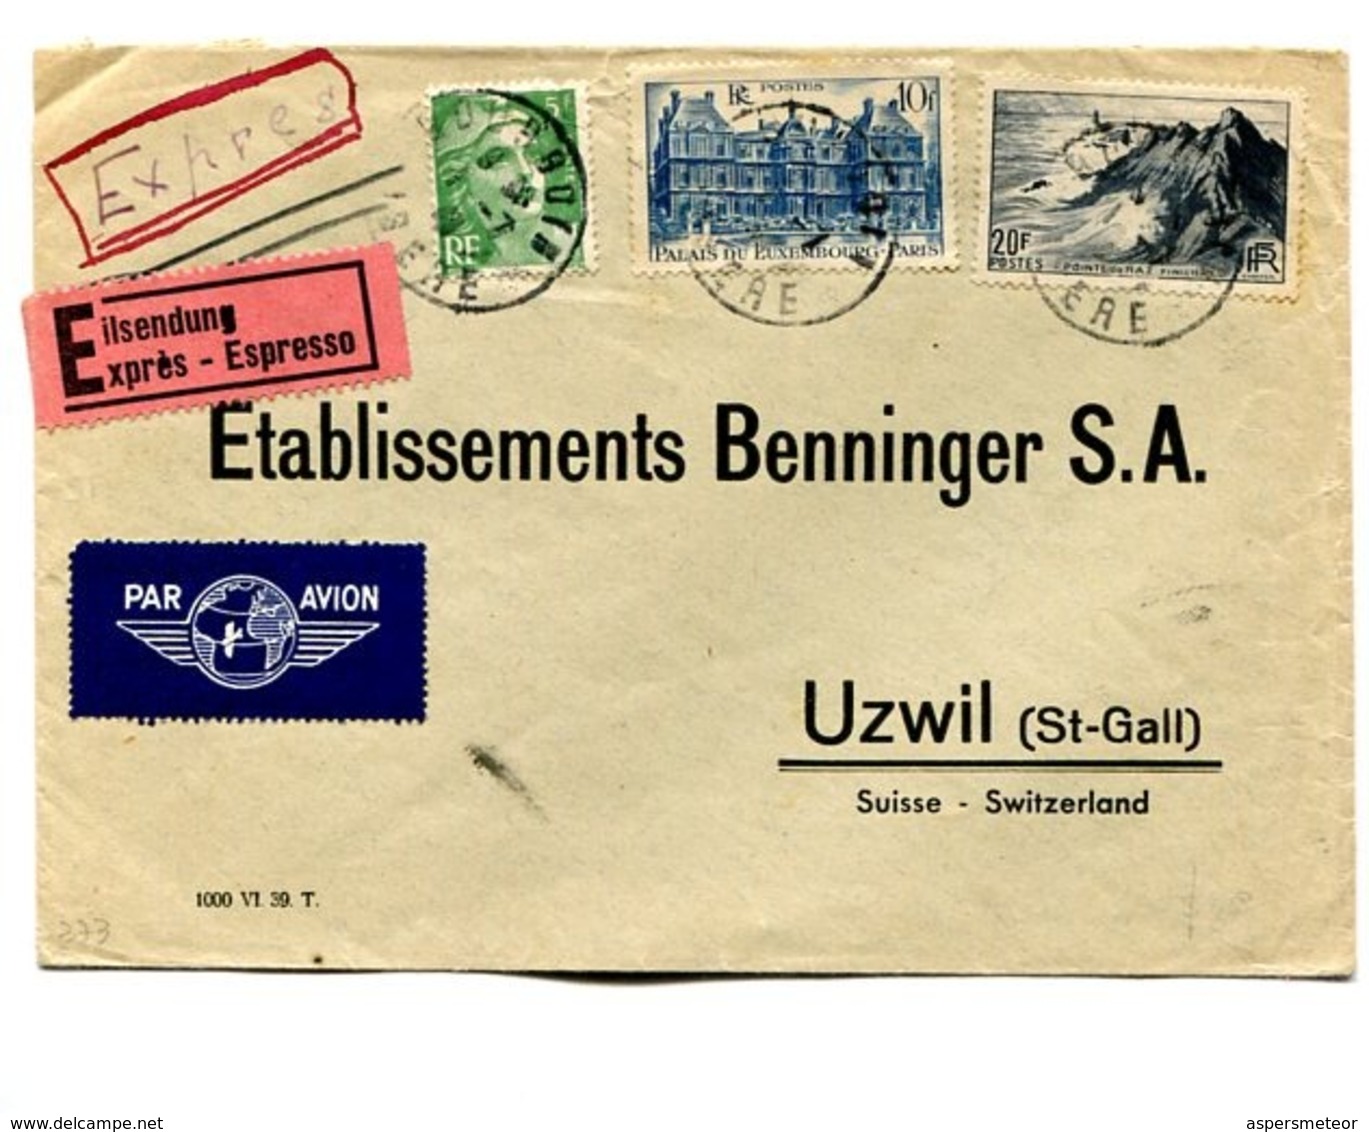 FRANCE COMMERCIAL COVER - CIRCULATED TO UZWIL (ST-GALL), SWITZELAND. CIRCA 1950's AIR MAIL EXPRES -LILHU - Cartas & Documentos